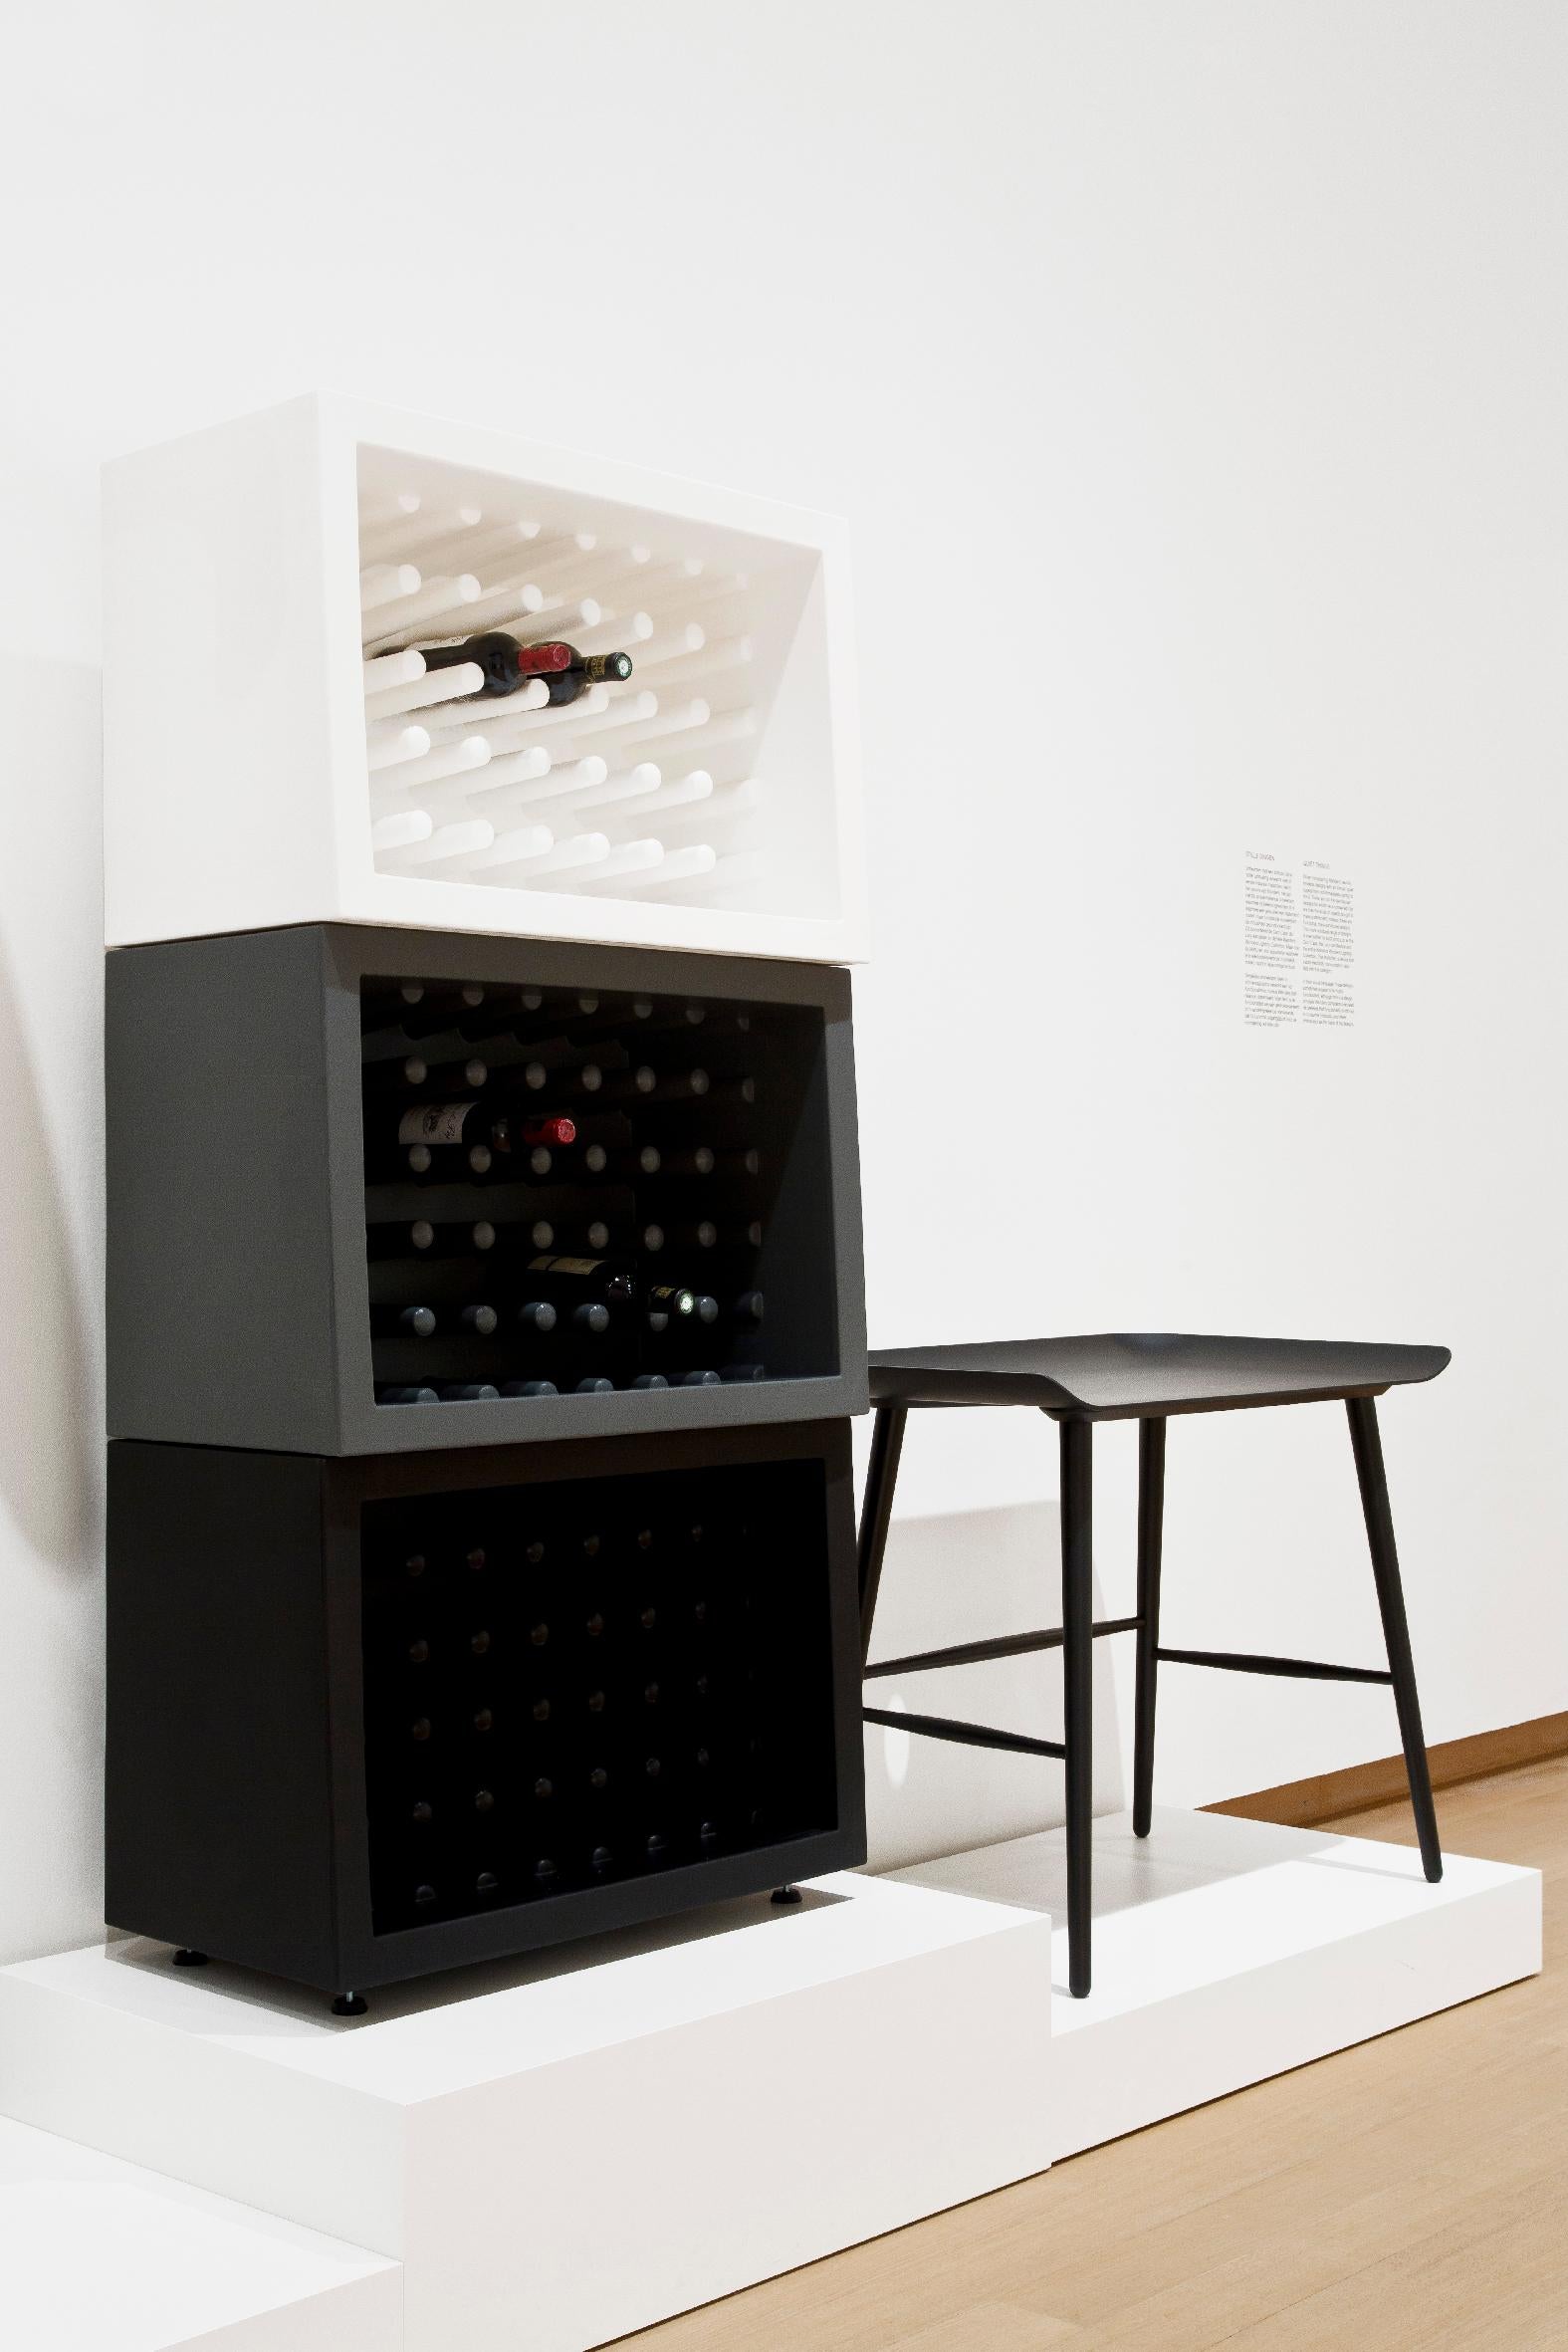 Bachus is an unusual bottle rack designed by the famous designer Marcel Wanders. Its modularity and its essential design are ideal not only to contemporary settings but also to classic furnishing. Bachus is unusual e versatile, with its simple and